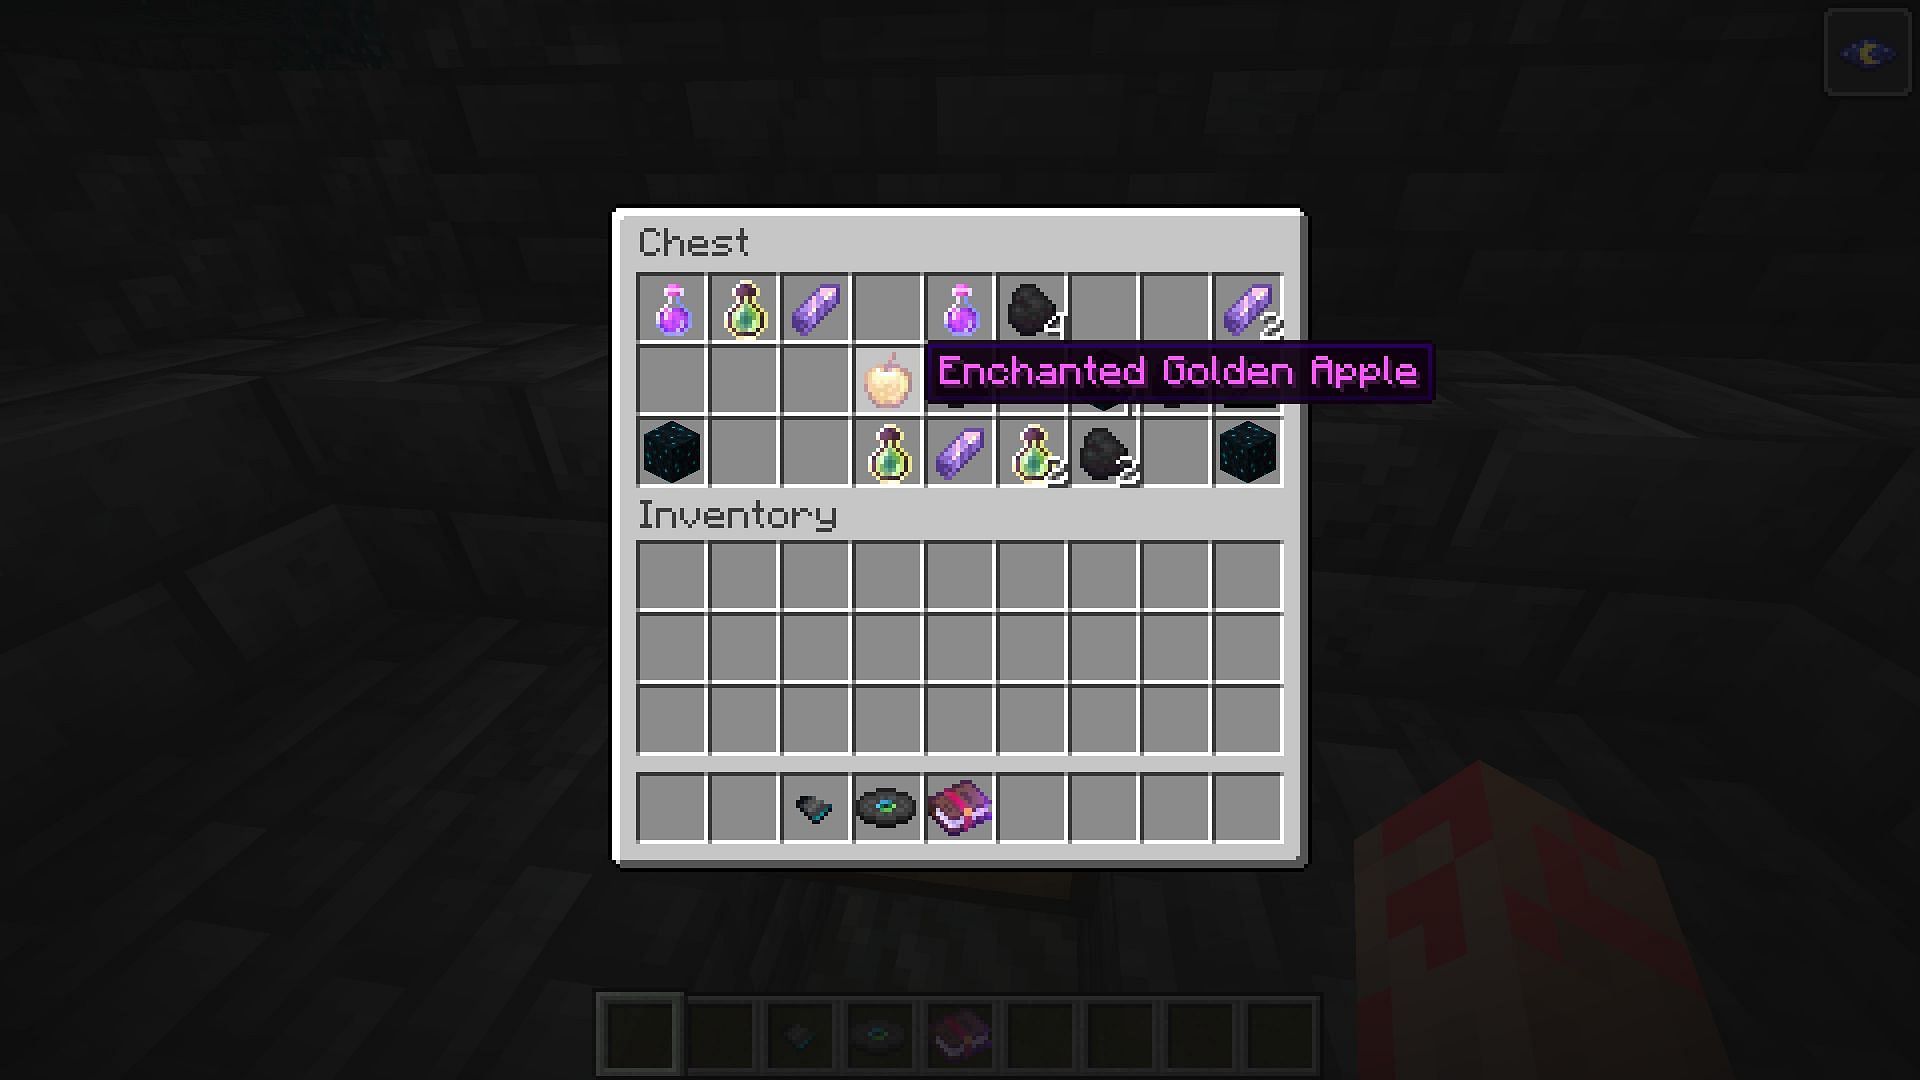 Enchanted golden apple in Ancient City chest in Minecraft (Image via Mojang)